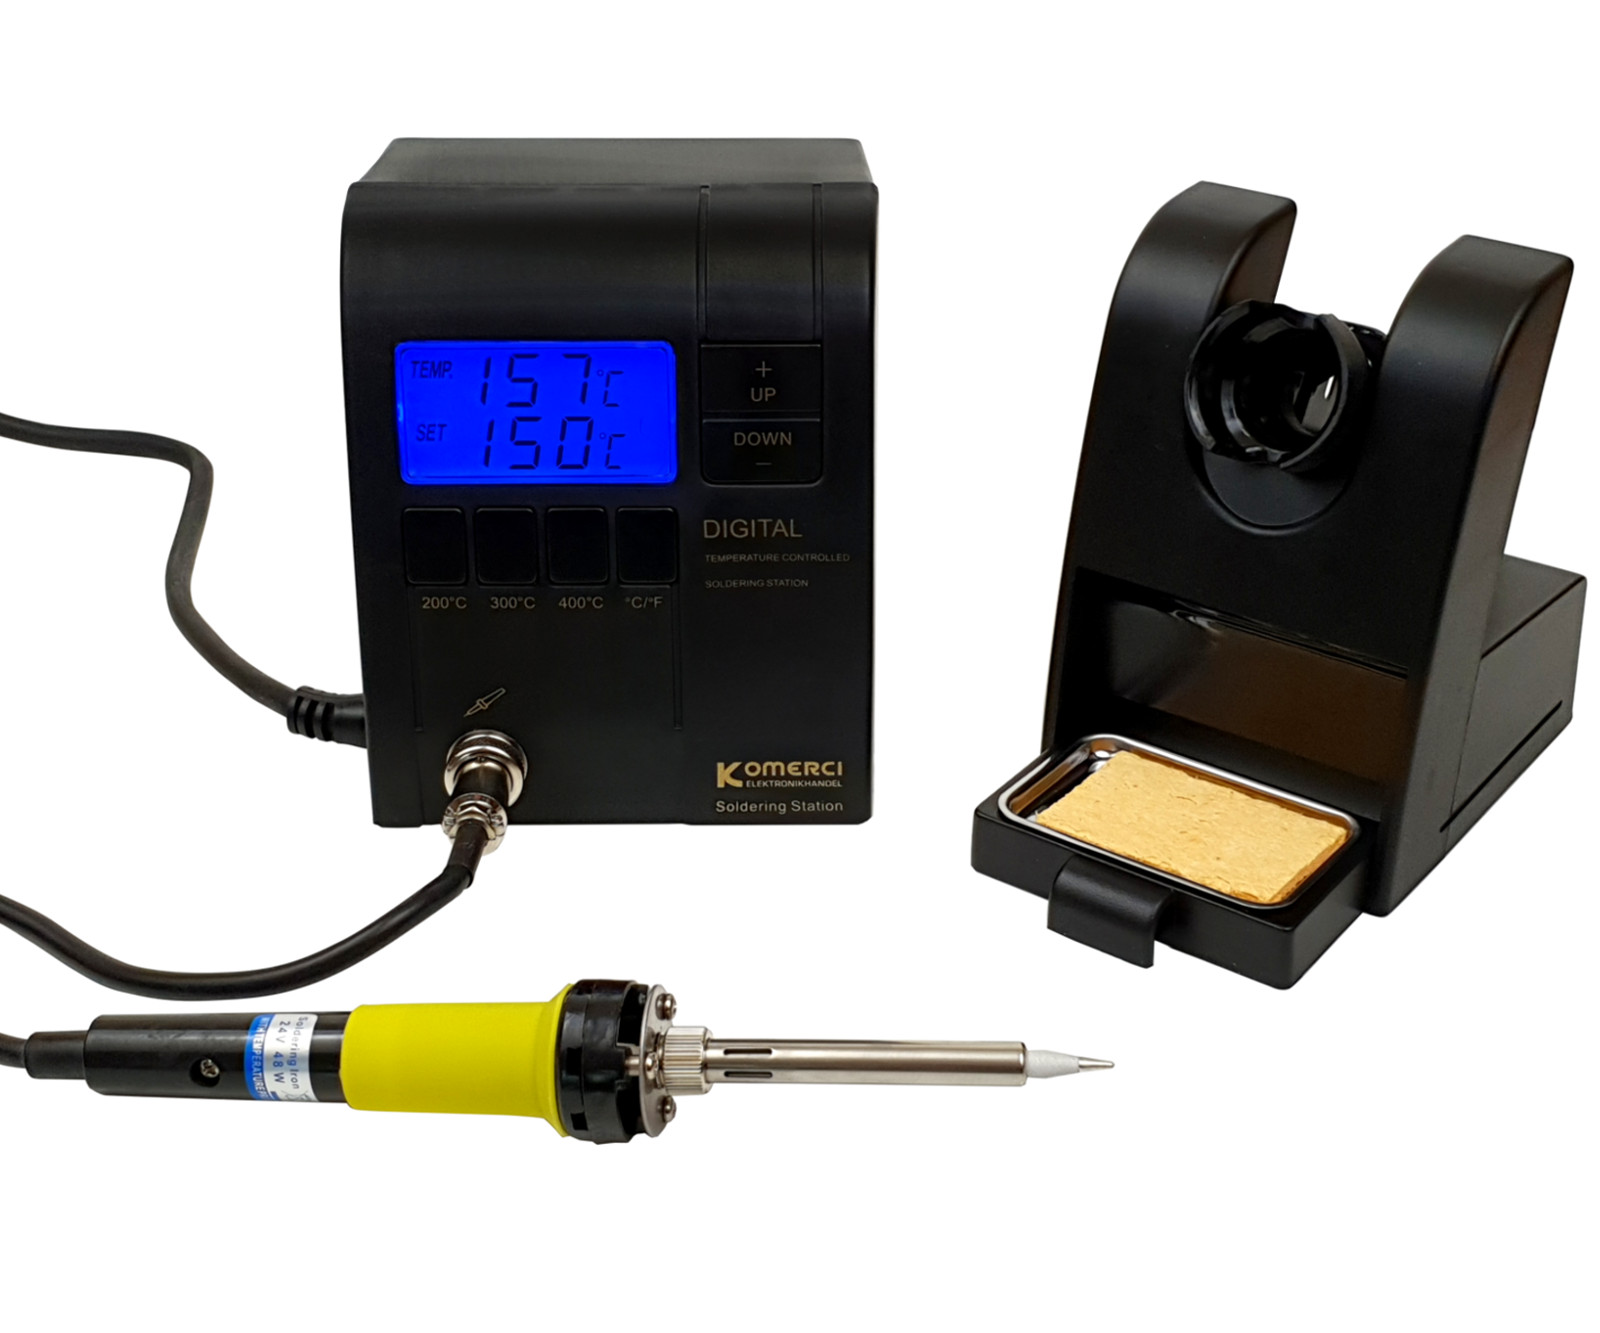 Digital regulated Soldering Station, pre-selction buttons, ESD